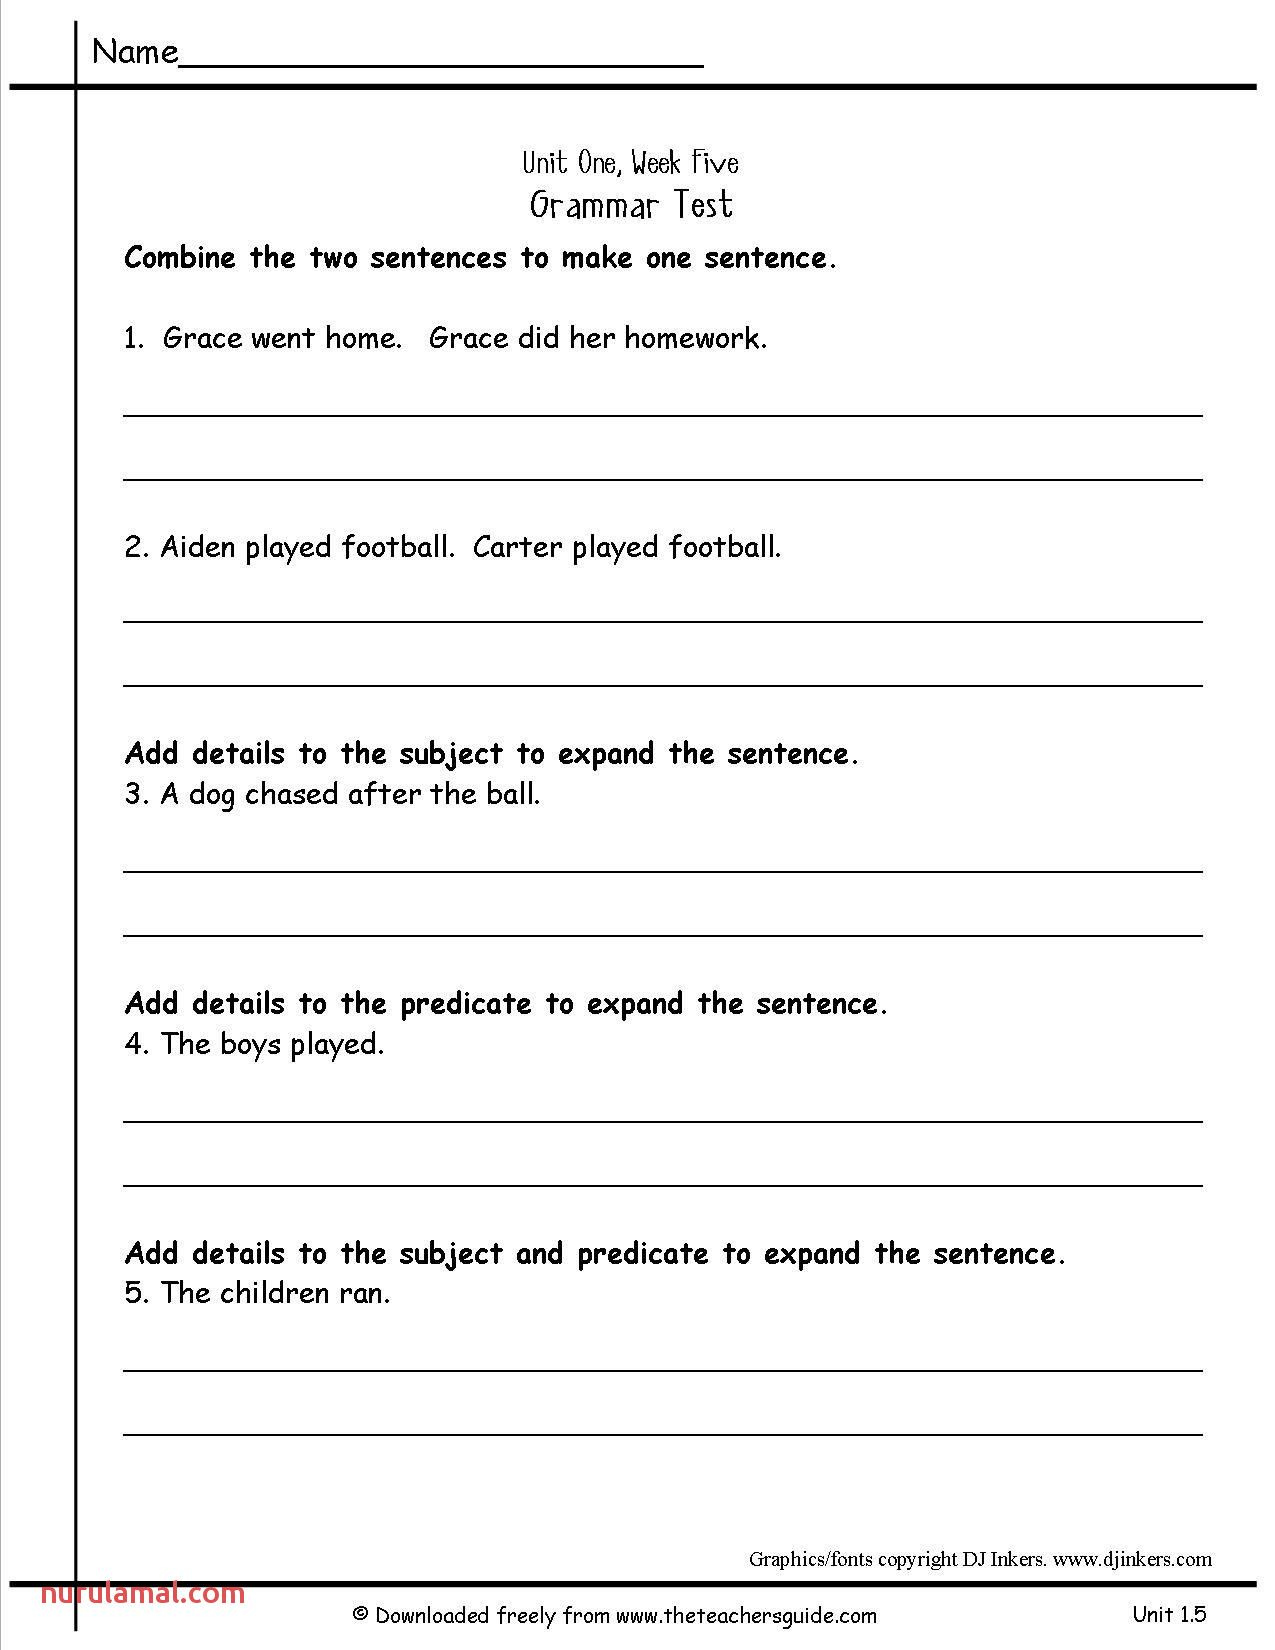 30 Ged Math Worksheets Edea smith